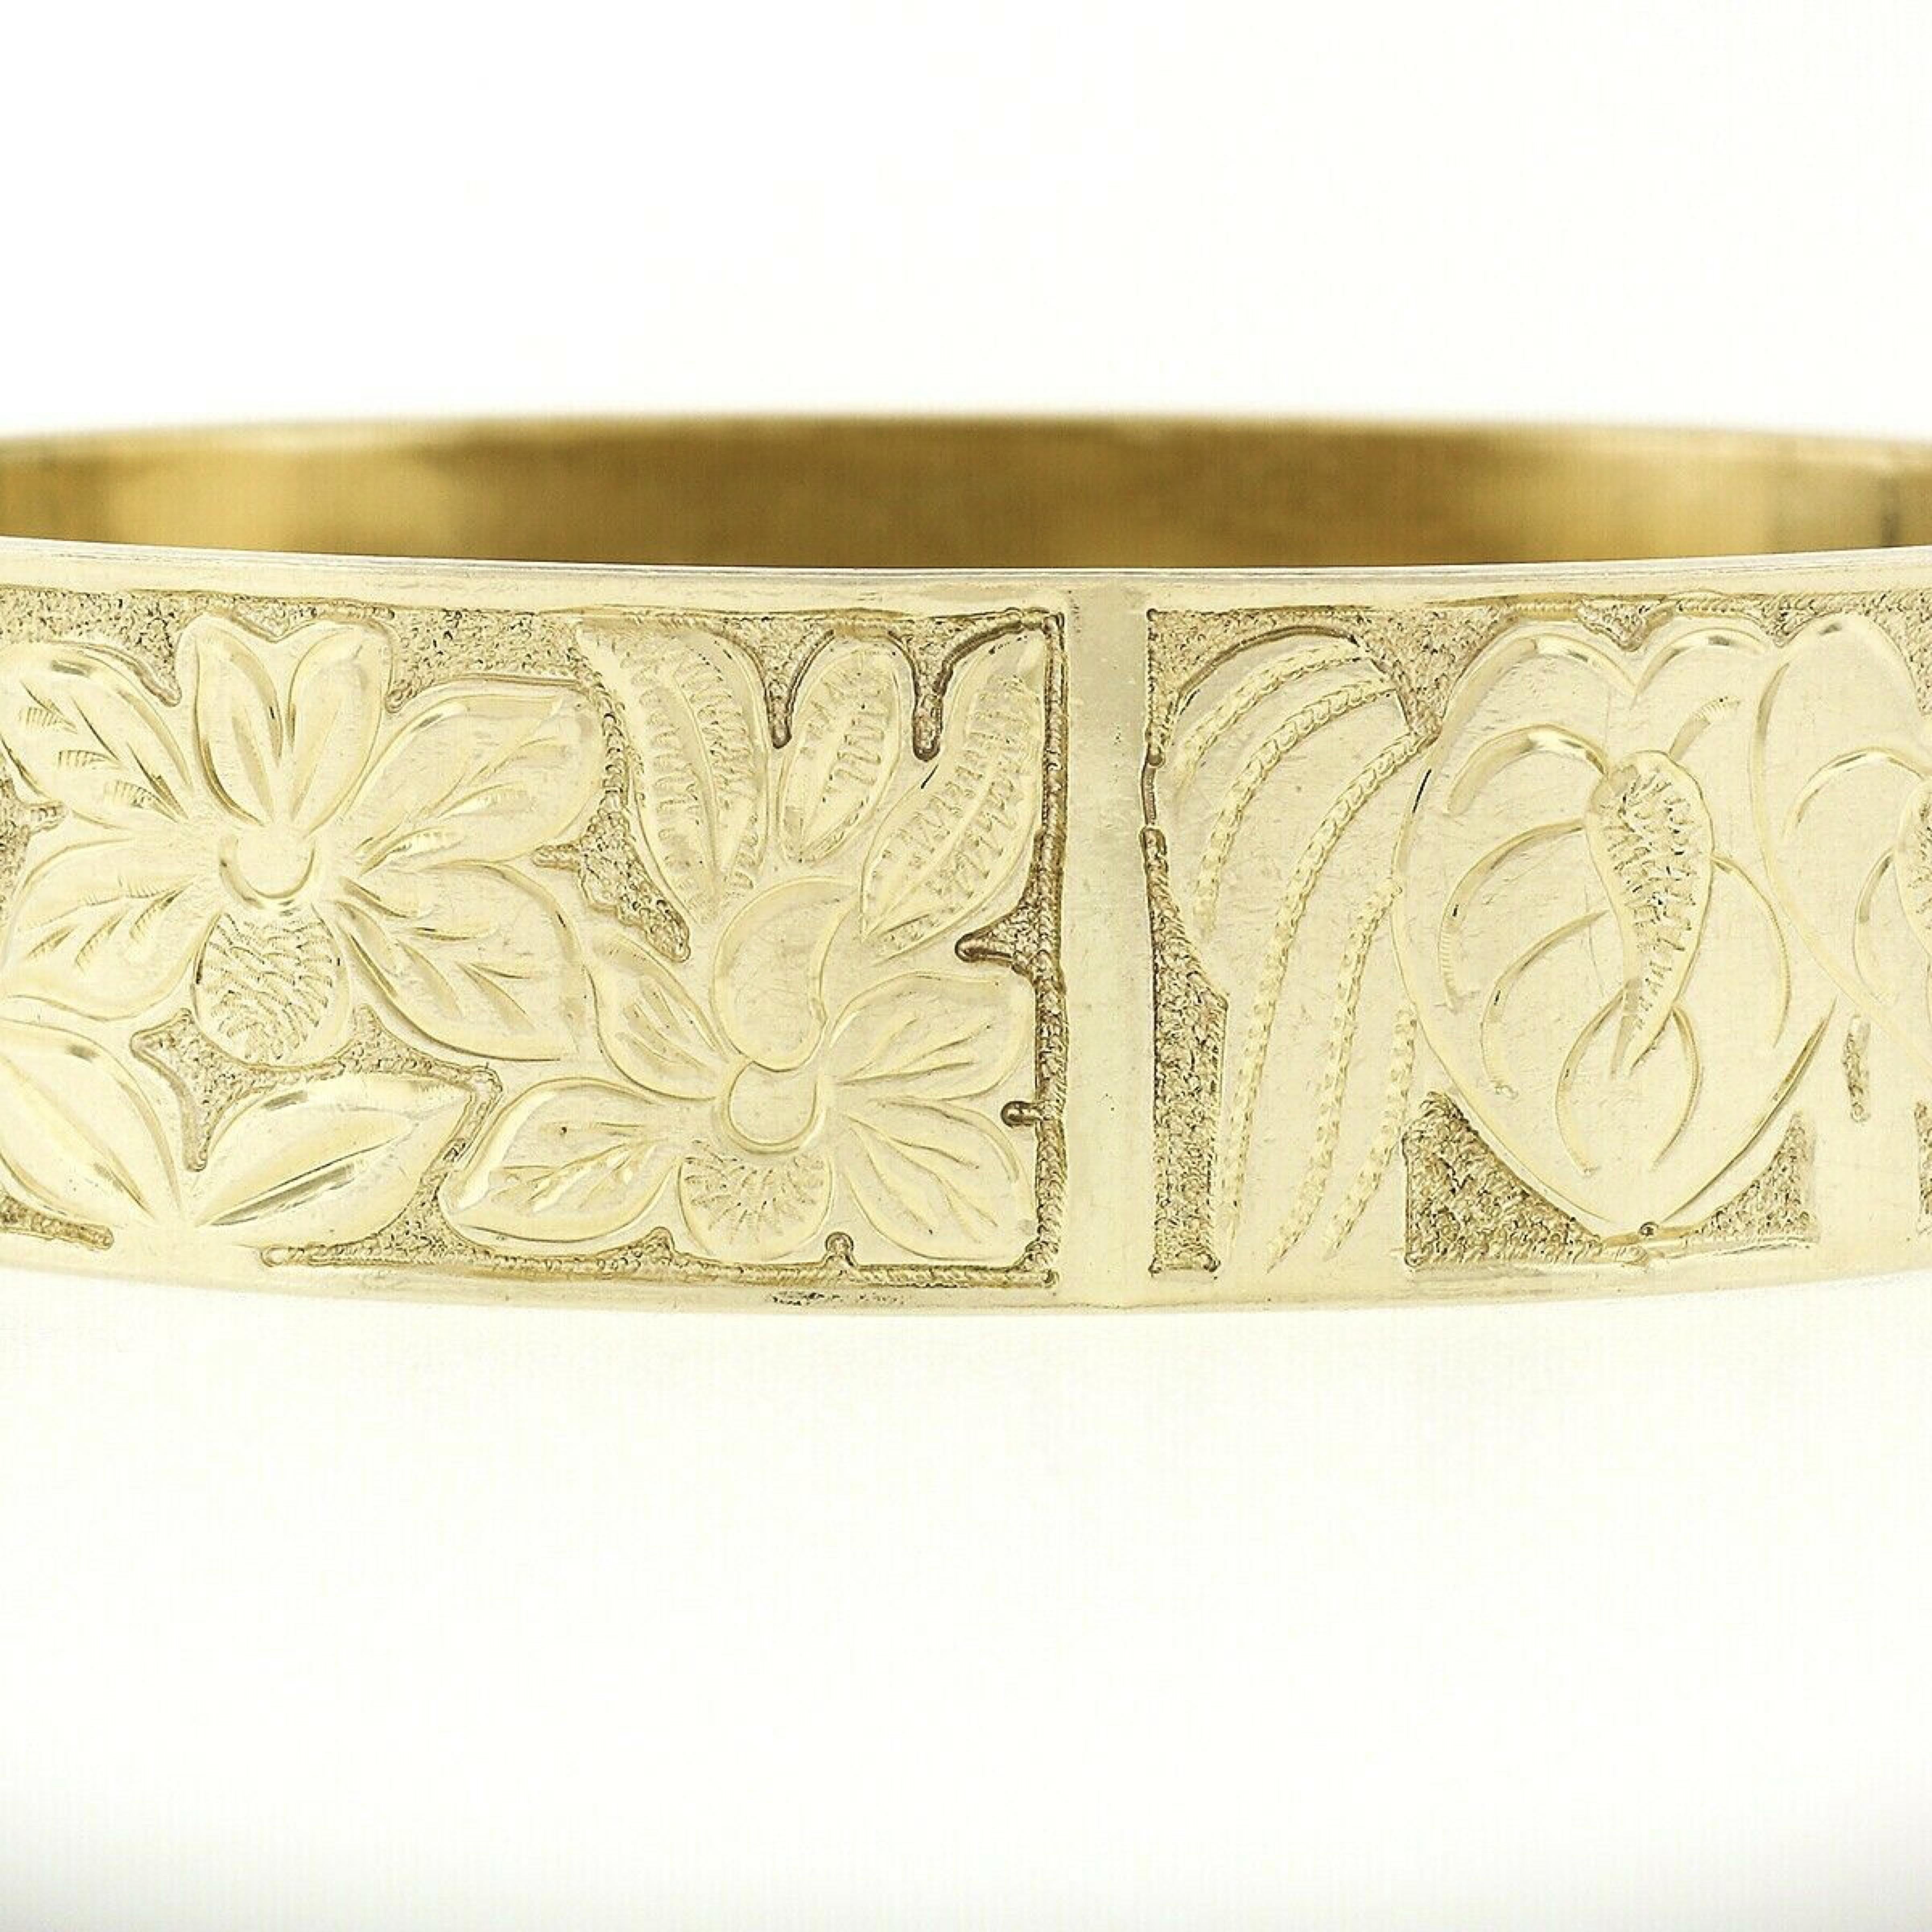 Here we have a very lovely slip-on bangle bracelet that was crafted from solid 14k yellow gold. It features 6 rectangular shaped panels which depict flowers, leaves, and a pair of turtles. At the center there is a square shaped panel displaying a